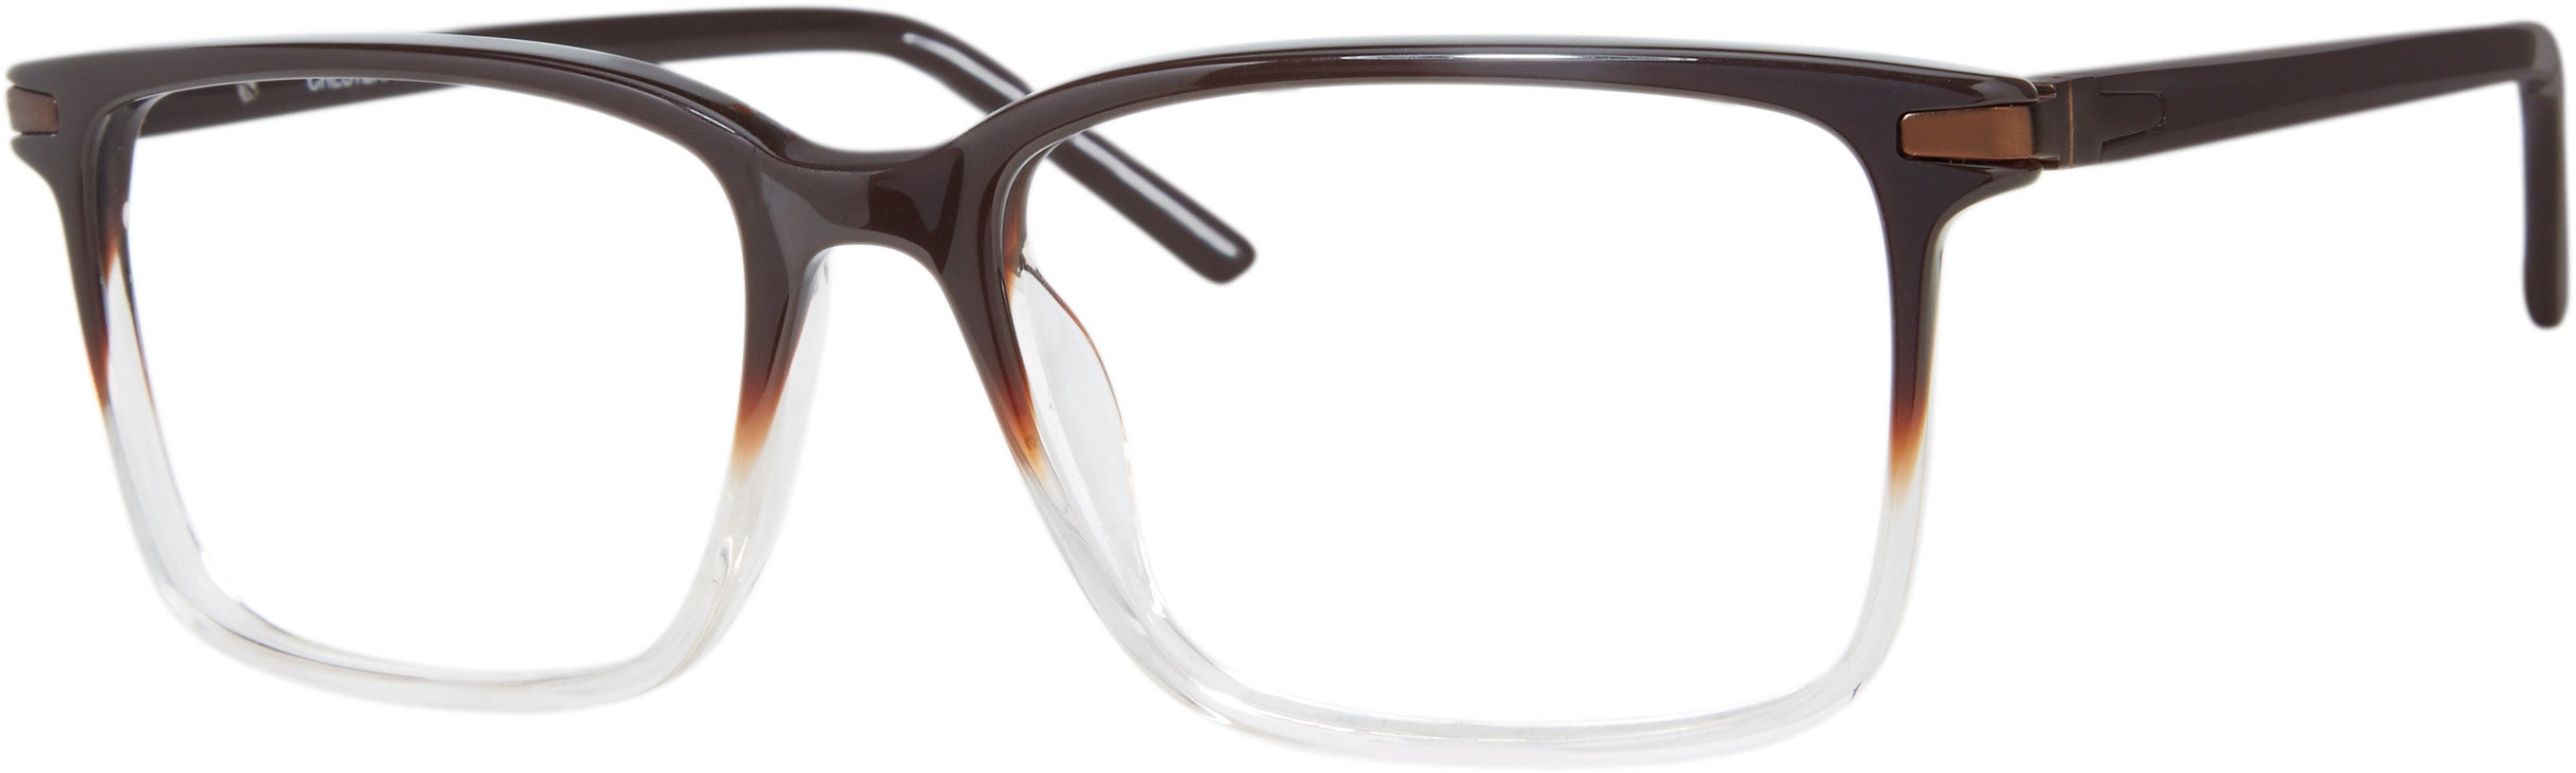  Chesterfield 76XL Square Eyeglasses 0YL3-0YL3  Brown Crystal (00 Demo Lens)